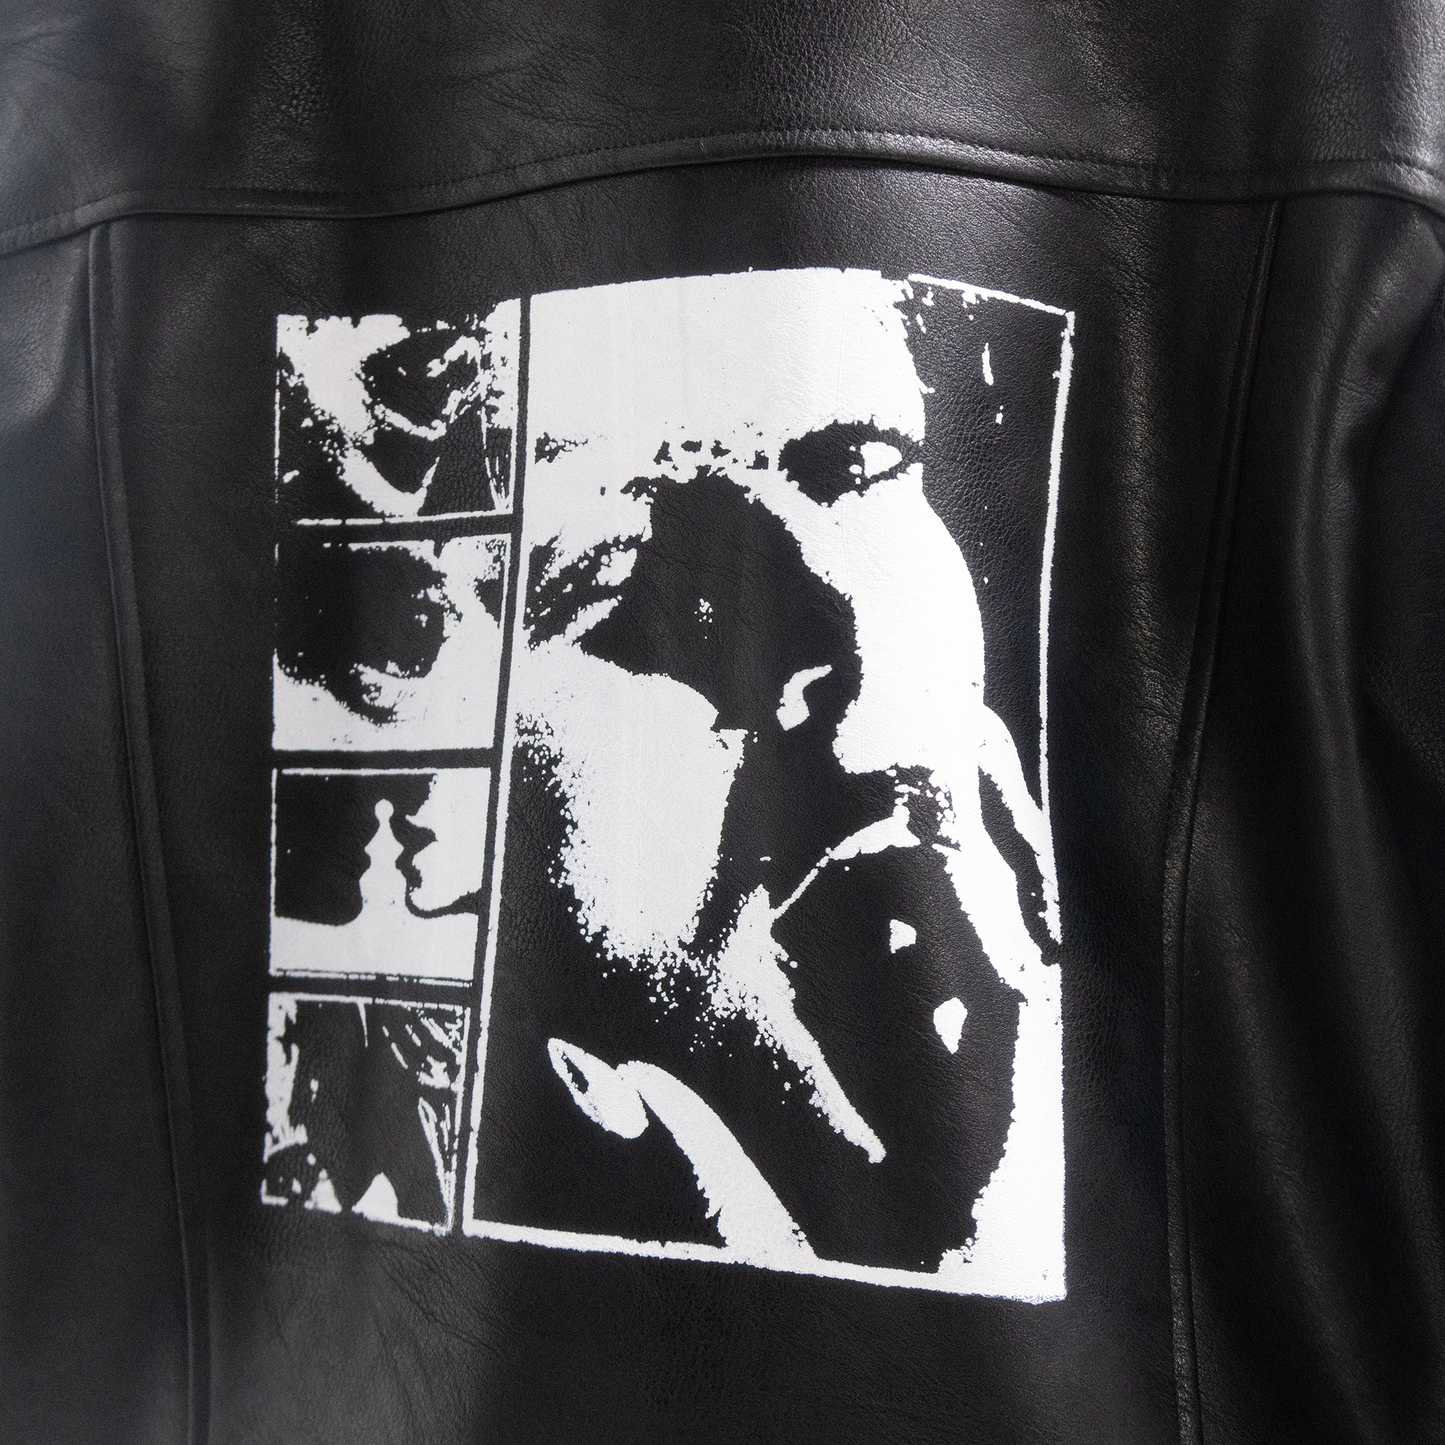 Chaos Is Order Jacket